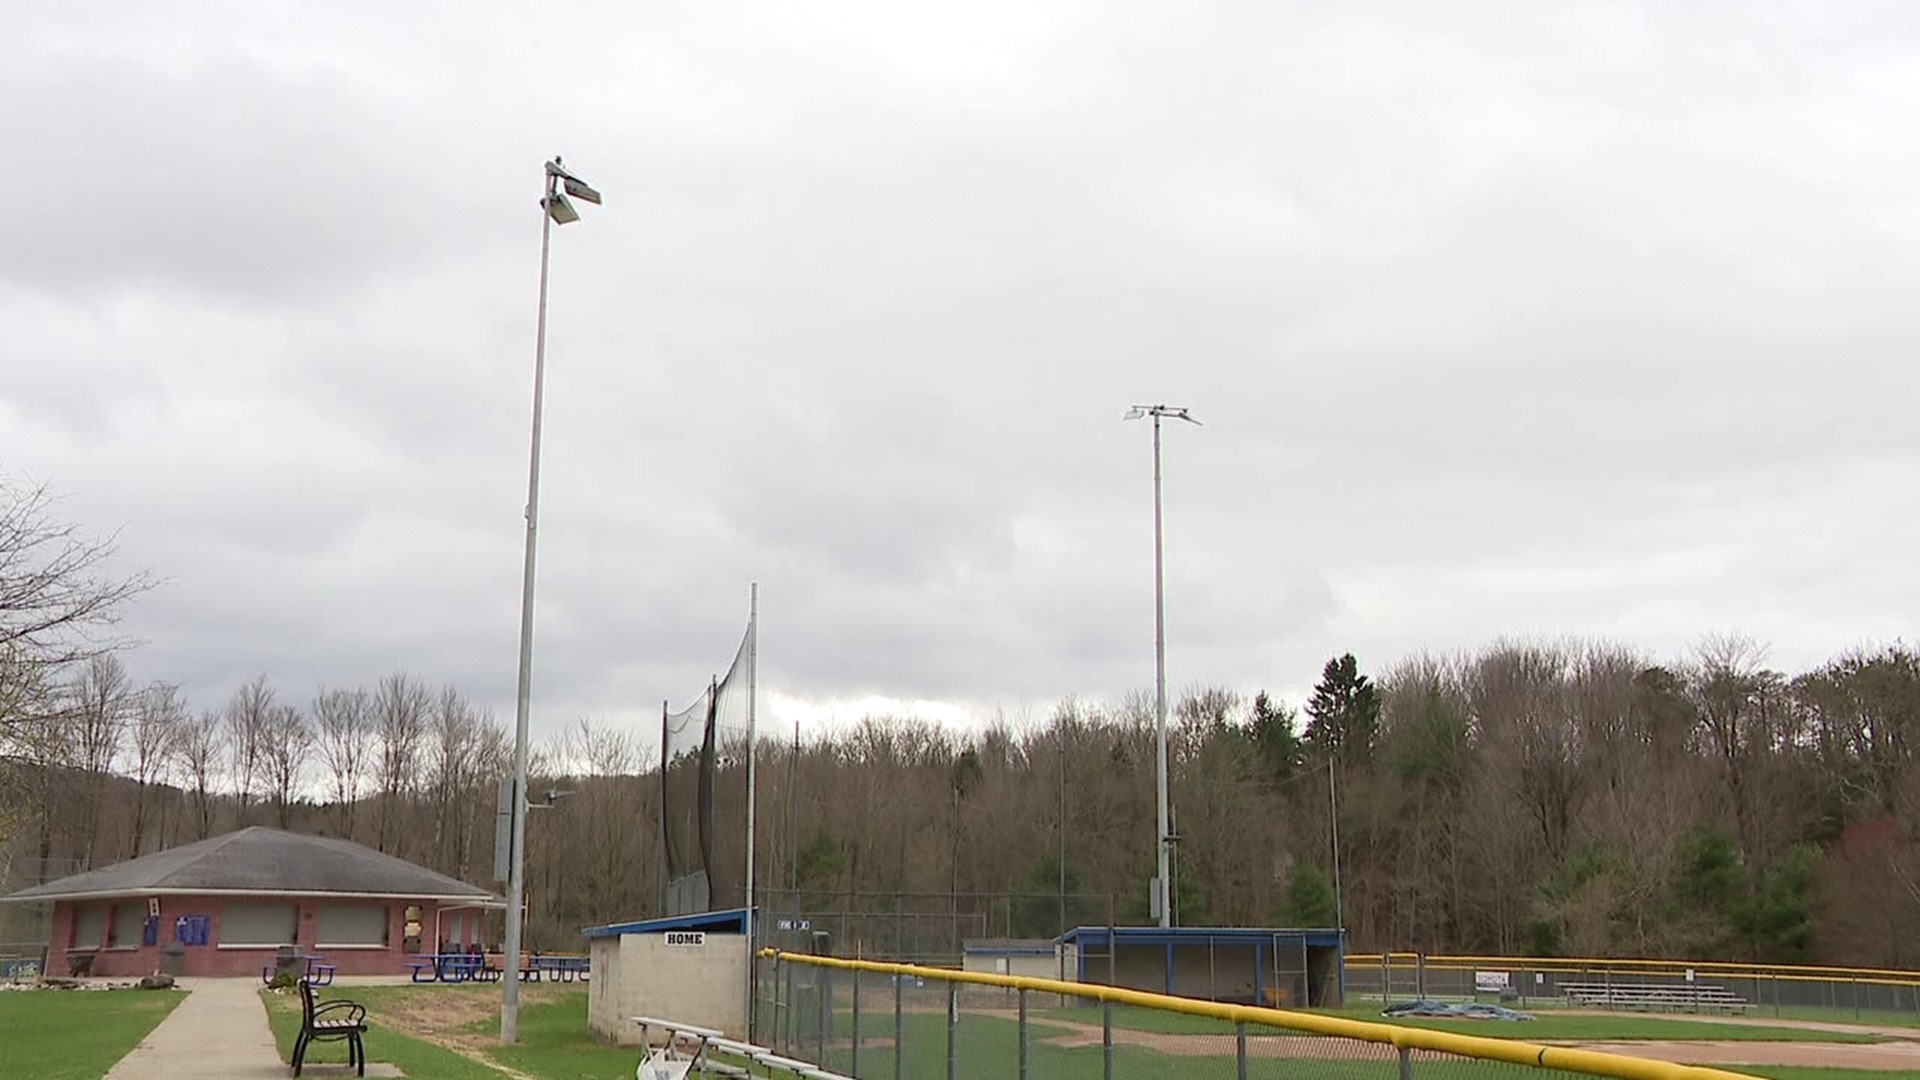 The lights at the Ackerly Field will debut on April 15 in Glenburn Township.